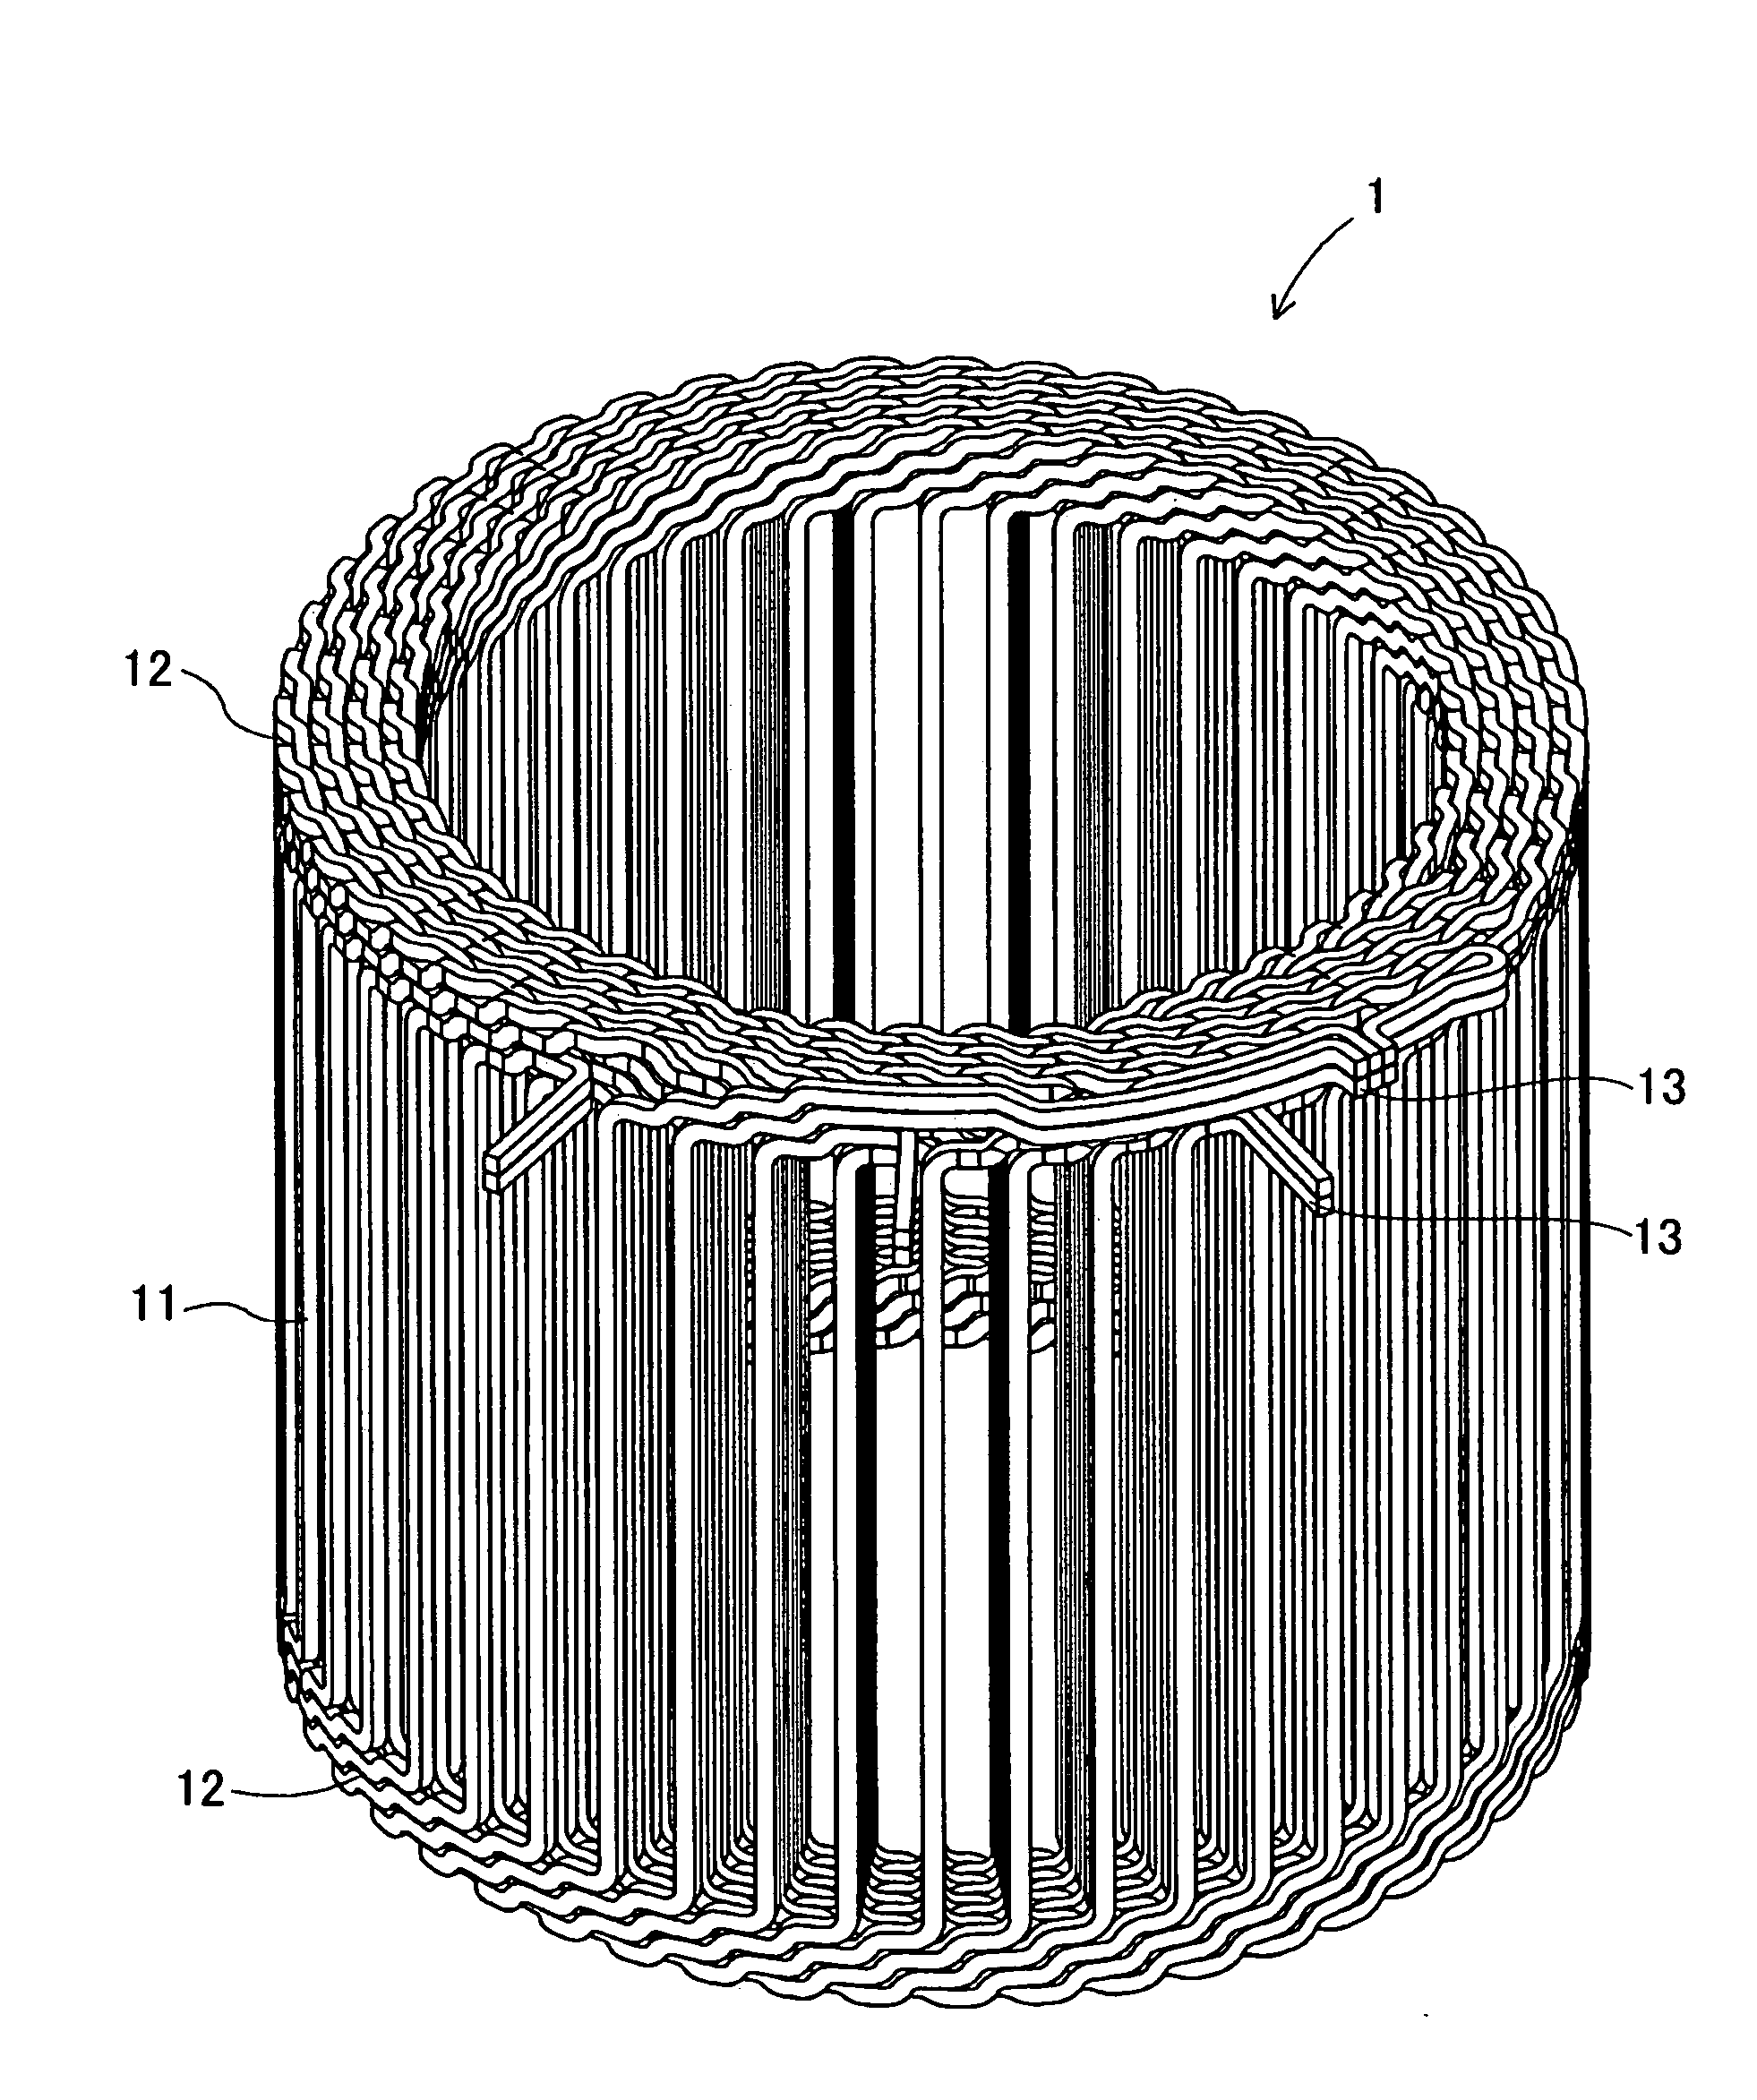 Segment-core type stator for inner-rotor type rotary electric machines and an improved method for manufacturing the stator